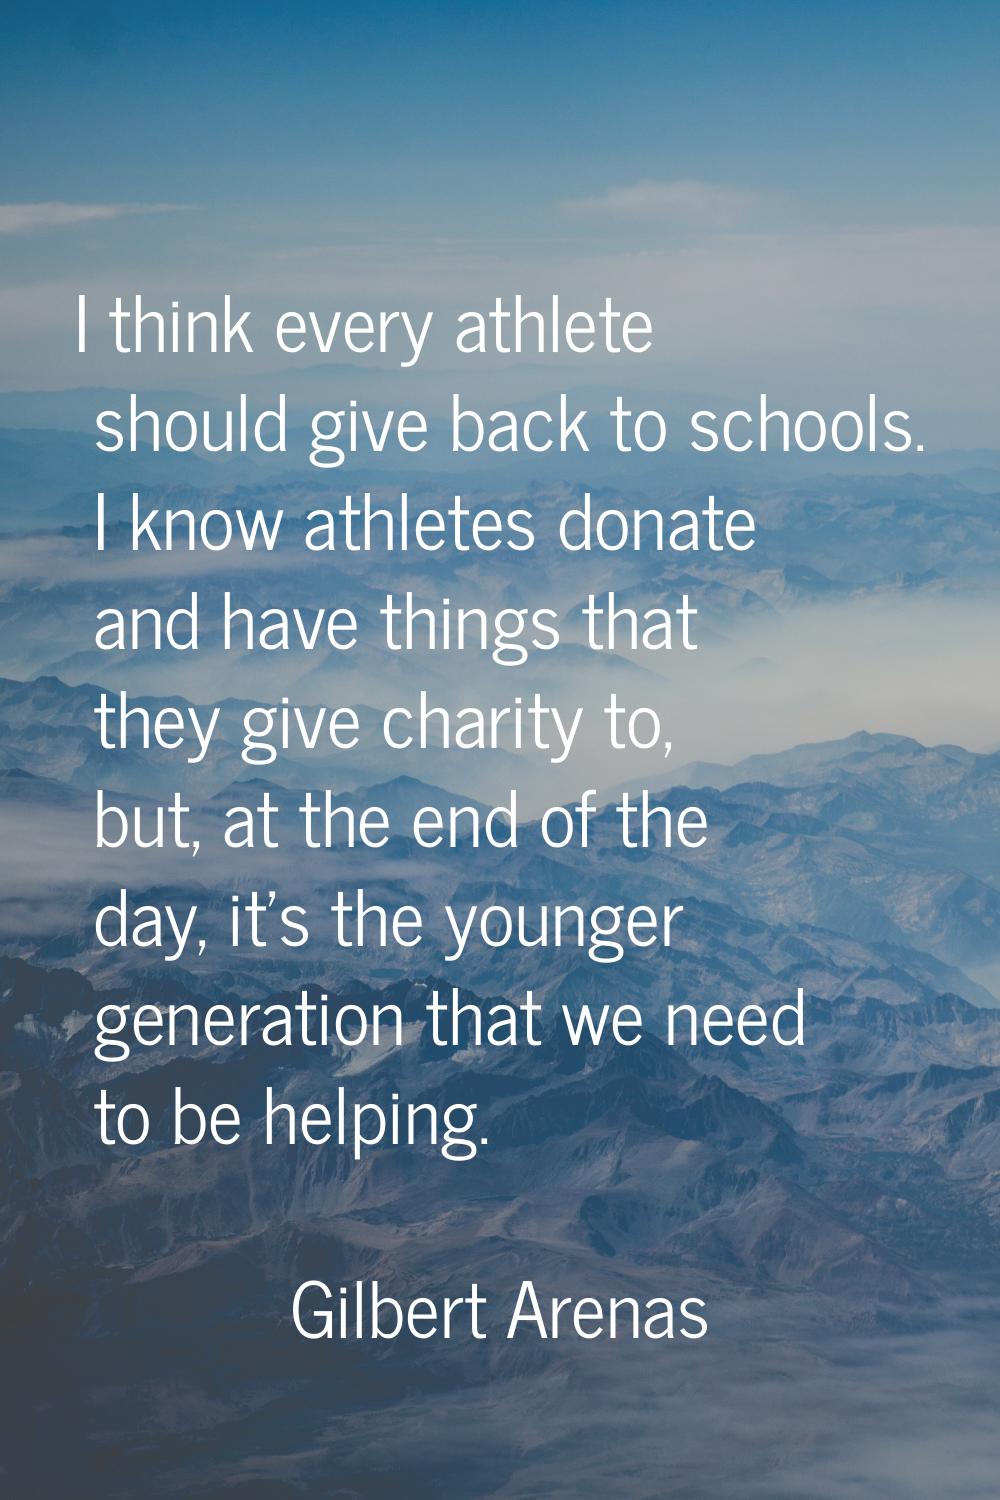 I think every athlete should give back to schools. I know athletes donate and have things that they